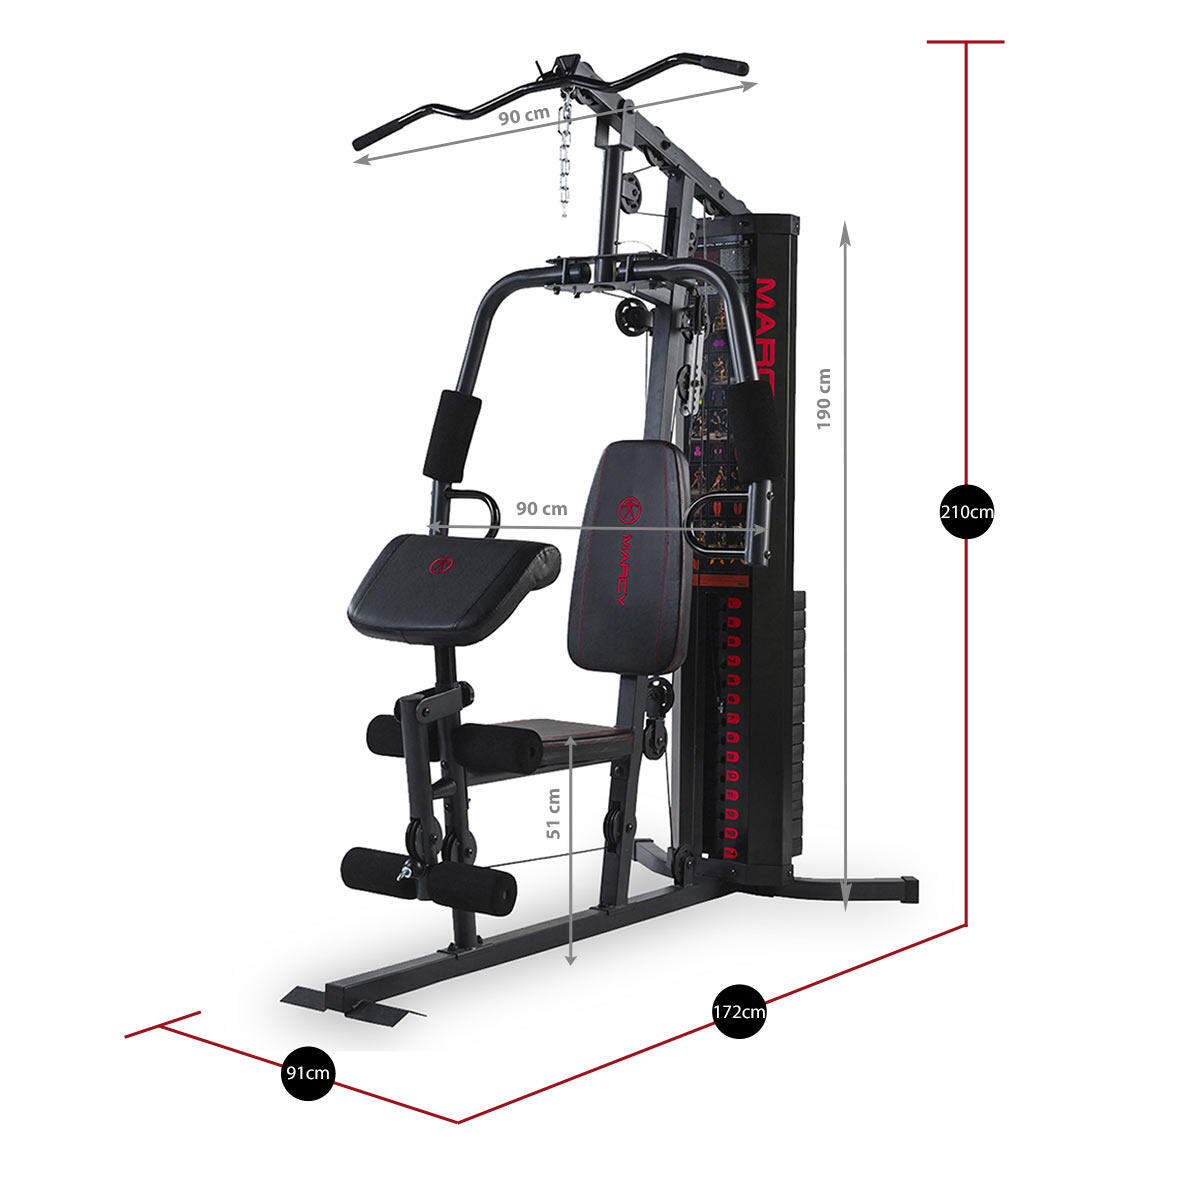 MARCY ECLIPSE HG3000 COMPACT HOME MULTI GYM 5/7